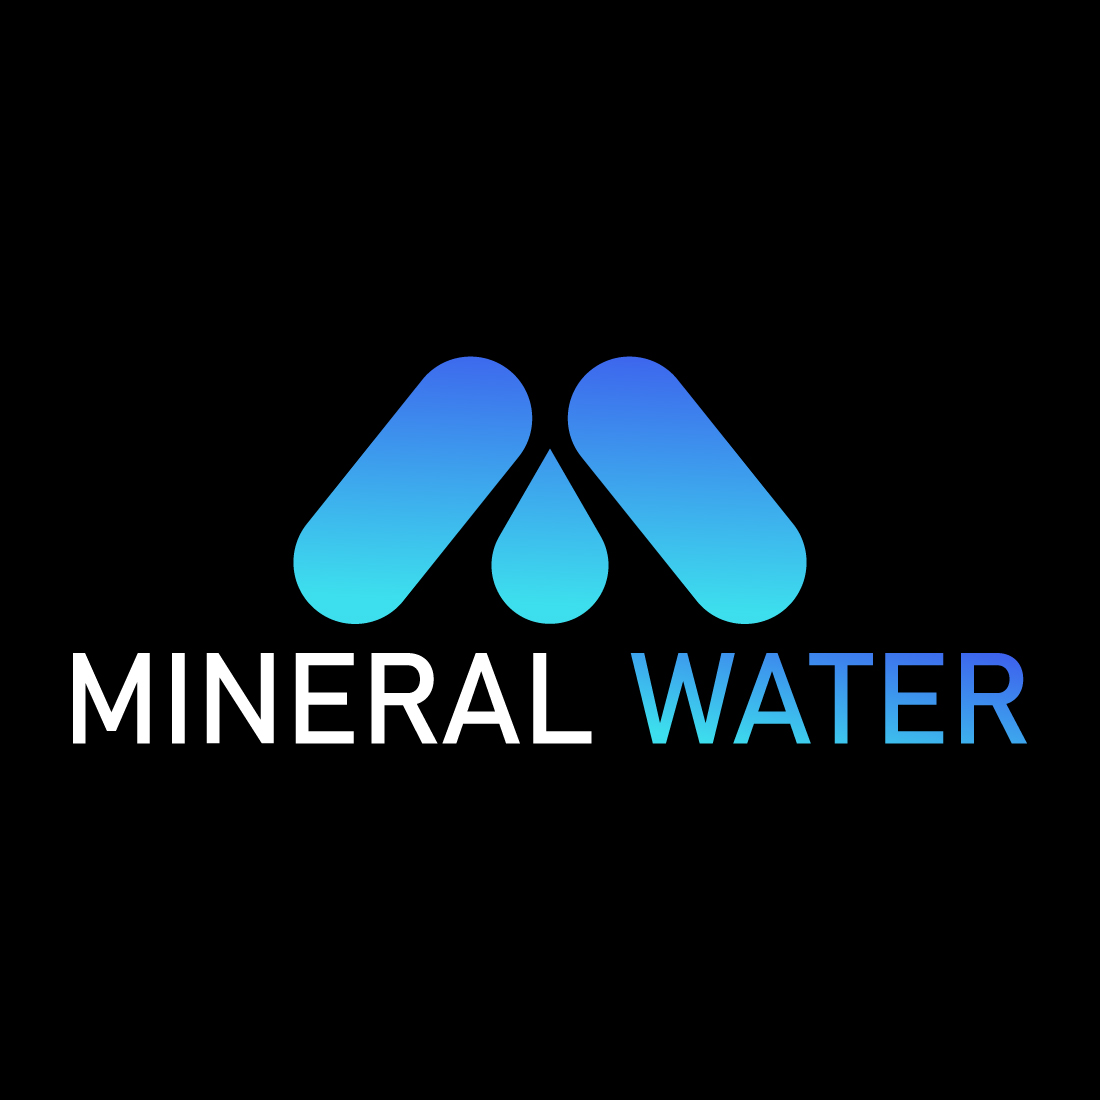 Mineral-water preview image.